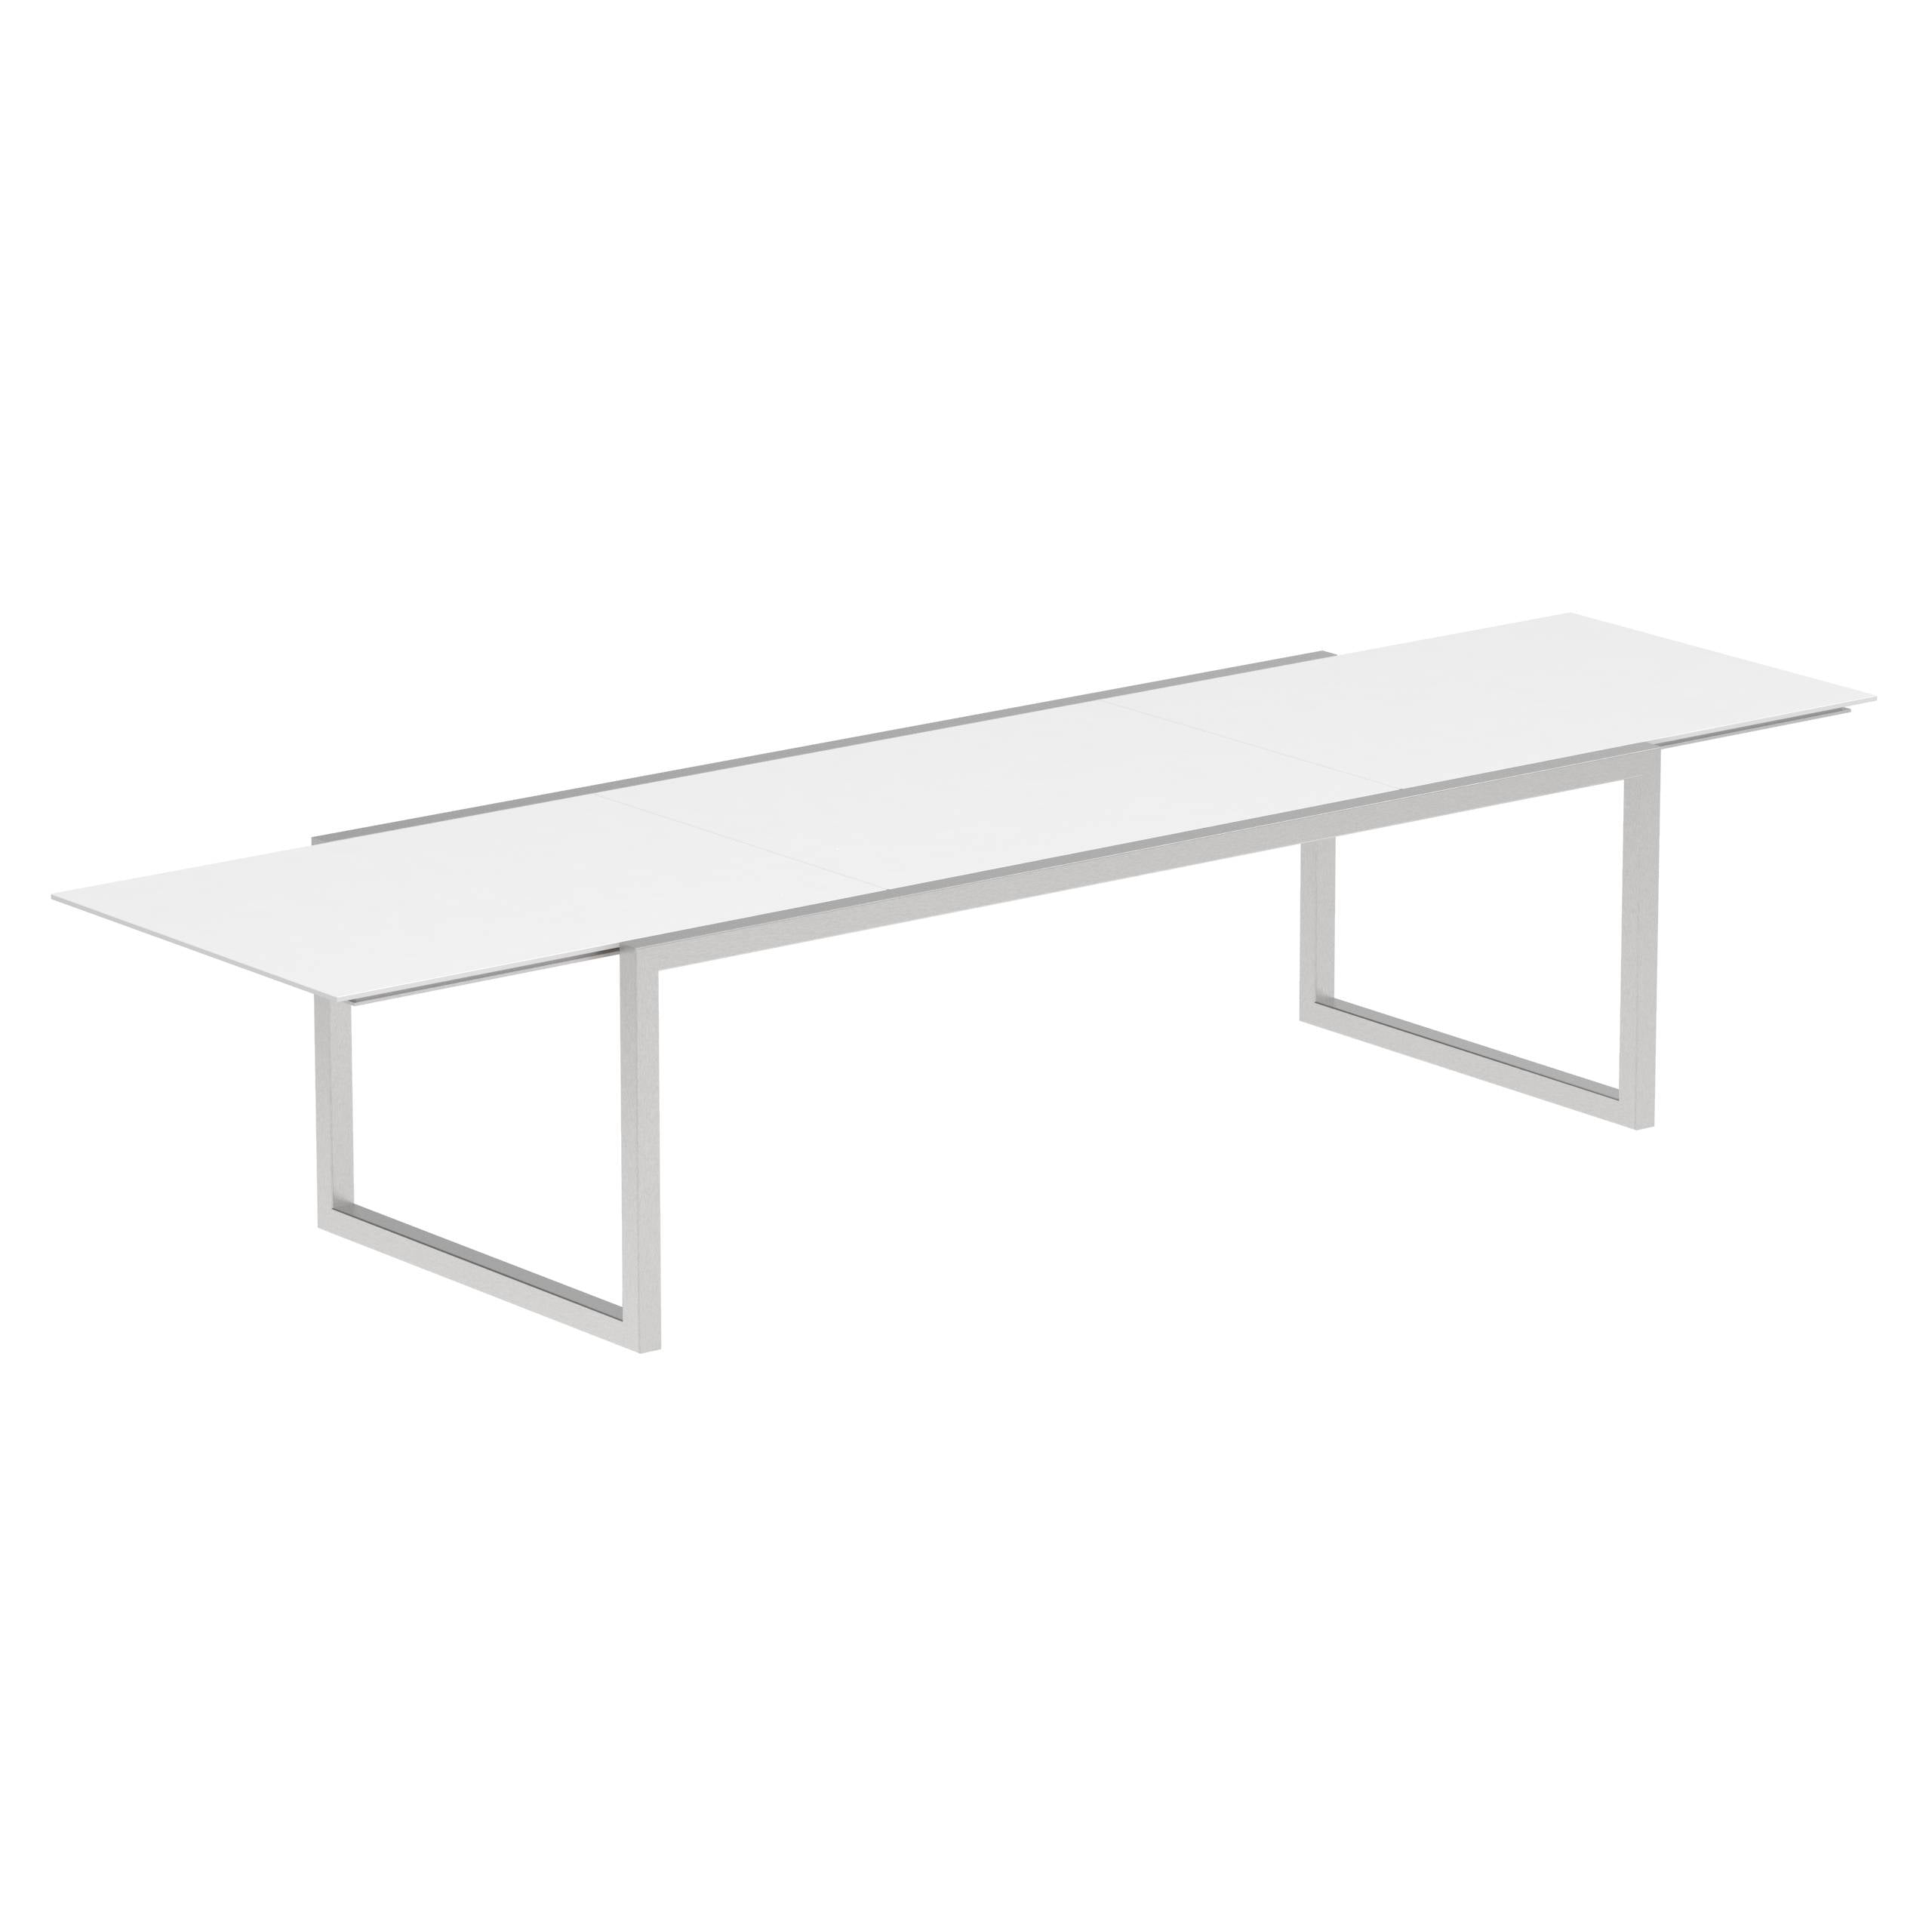 Ninix Extendable Table 100x240/360 With Ceramic White